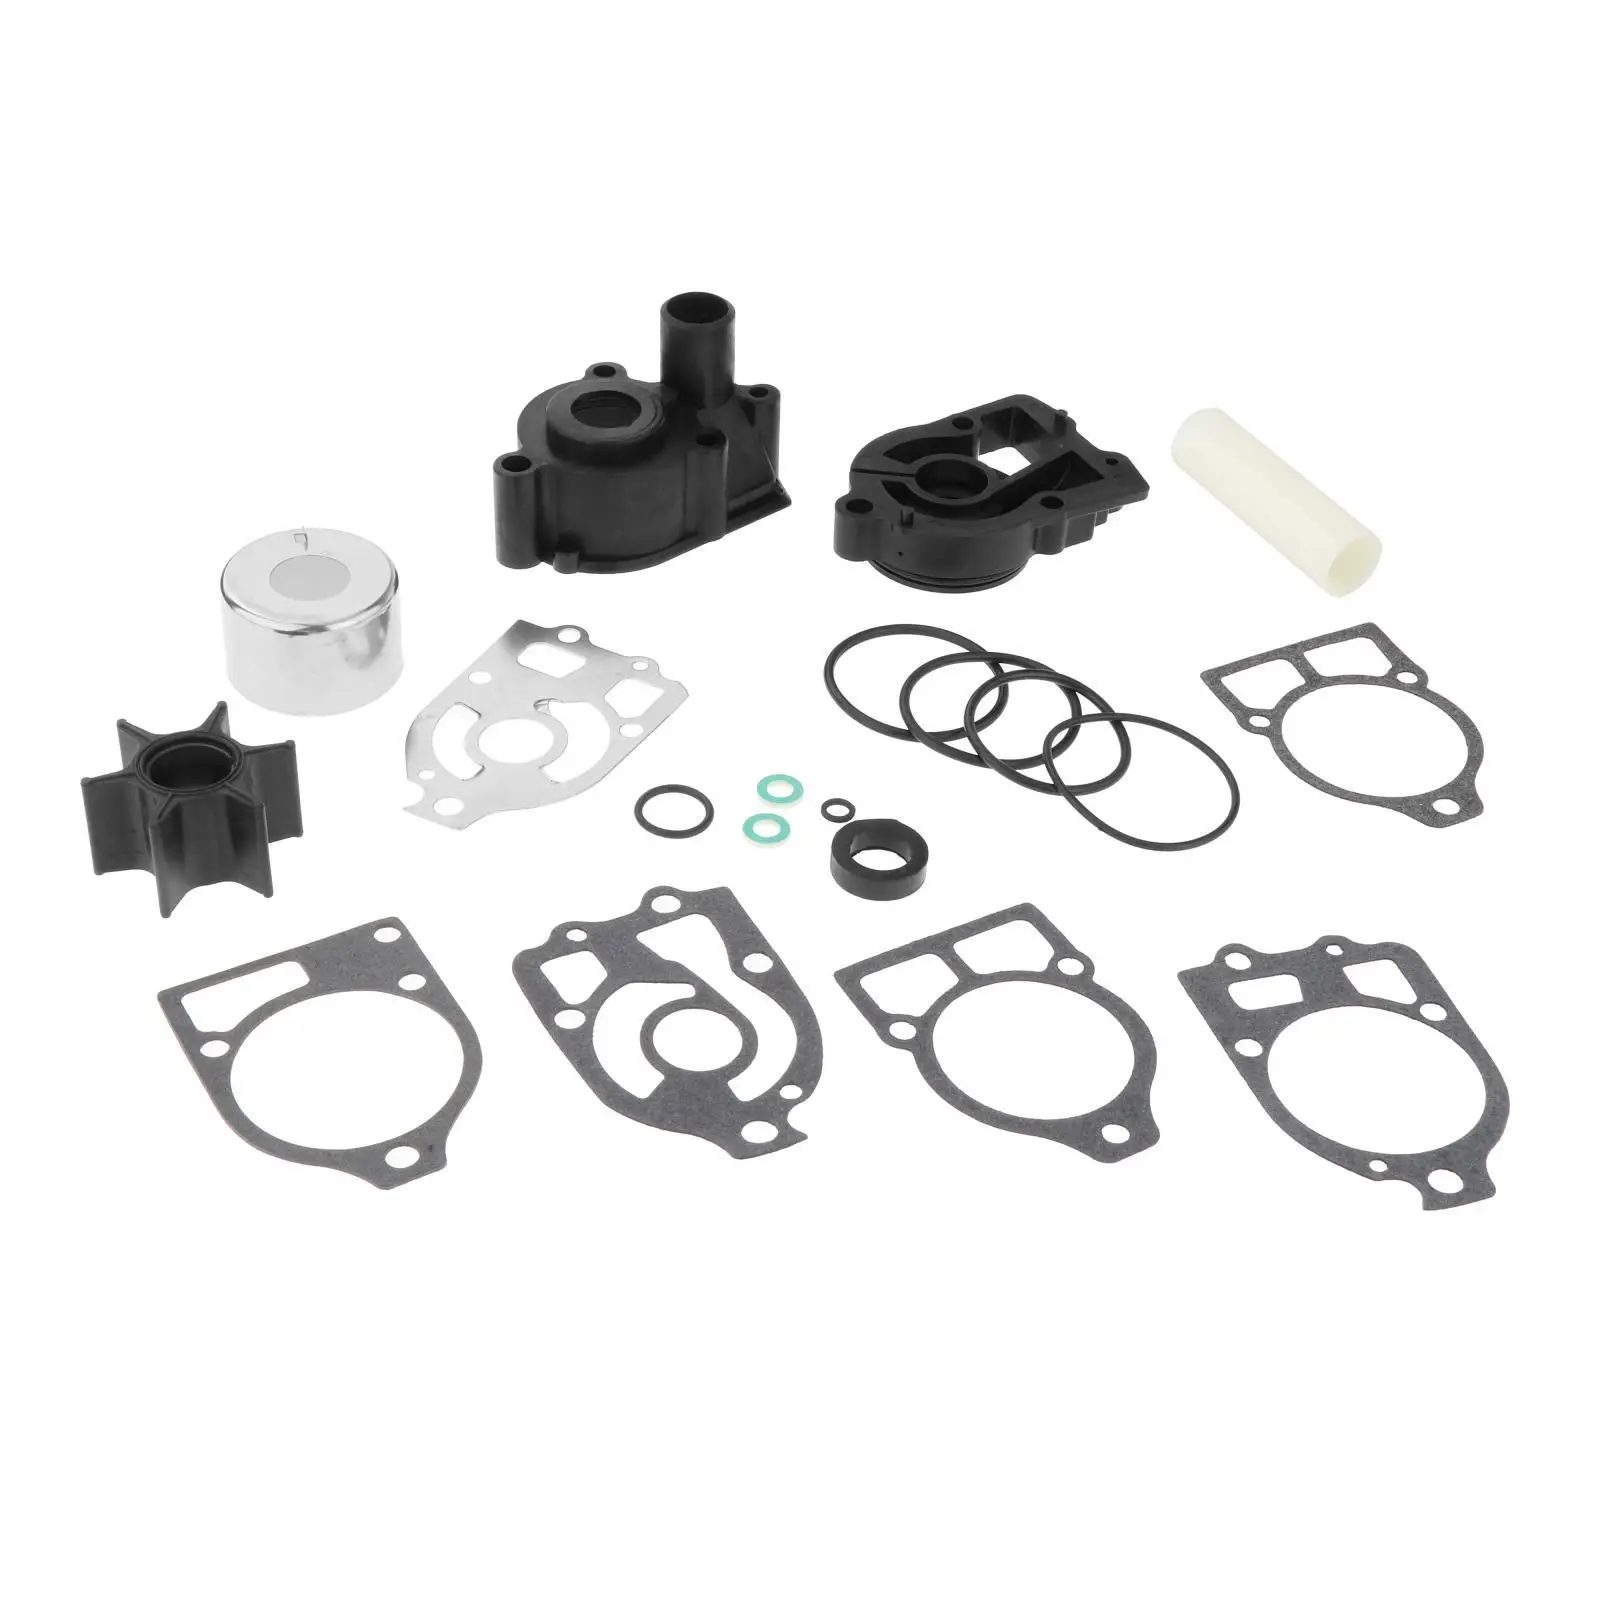 Water Pump Repair Kit with Housing Fit for Mercury Replace Accessories Parts Easy to Install